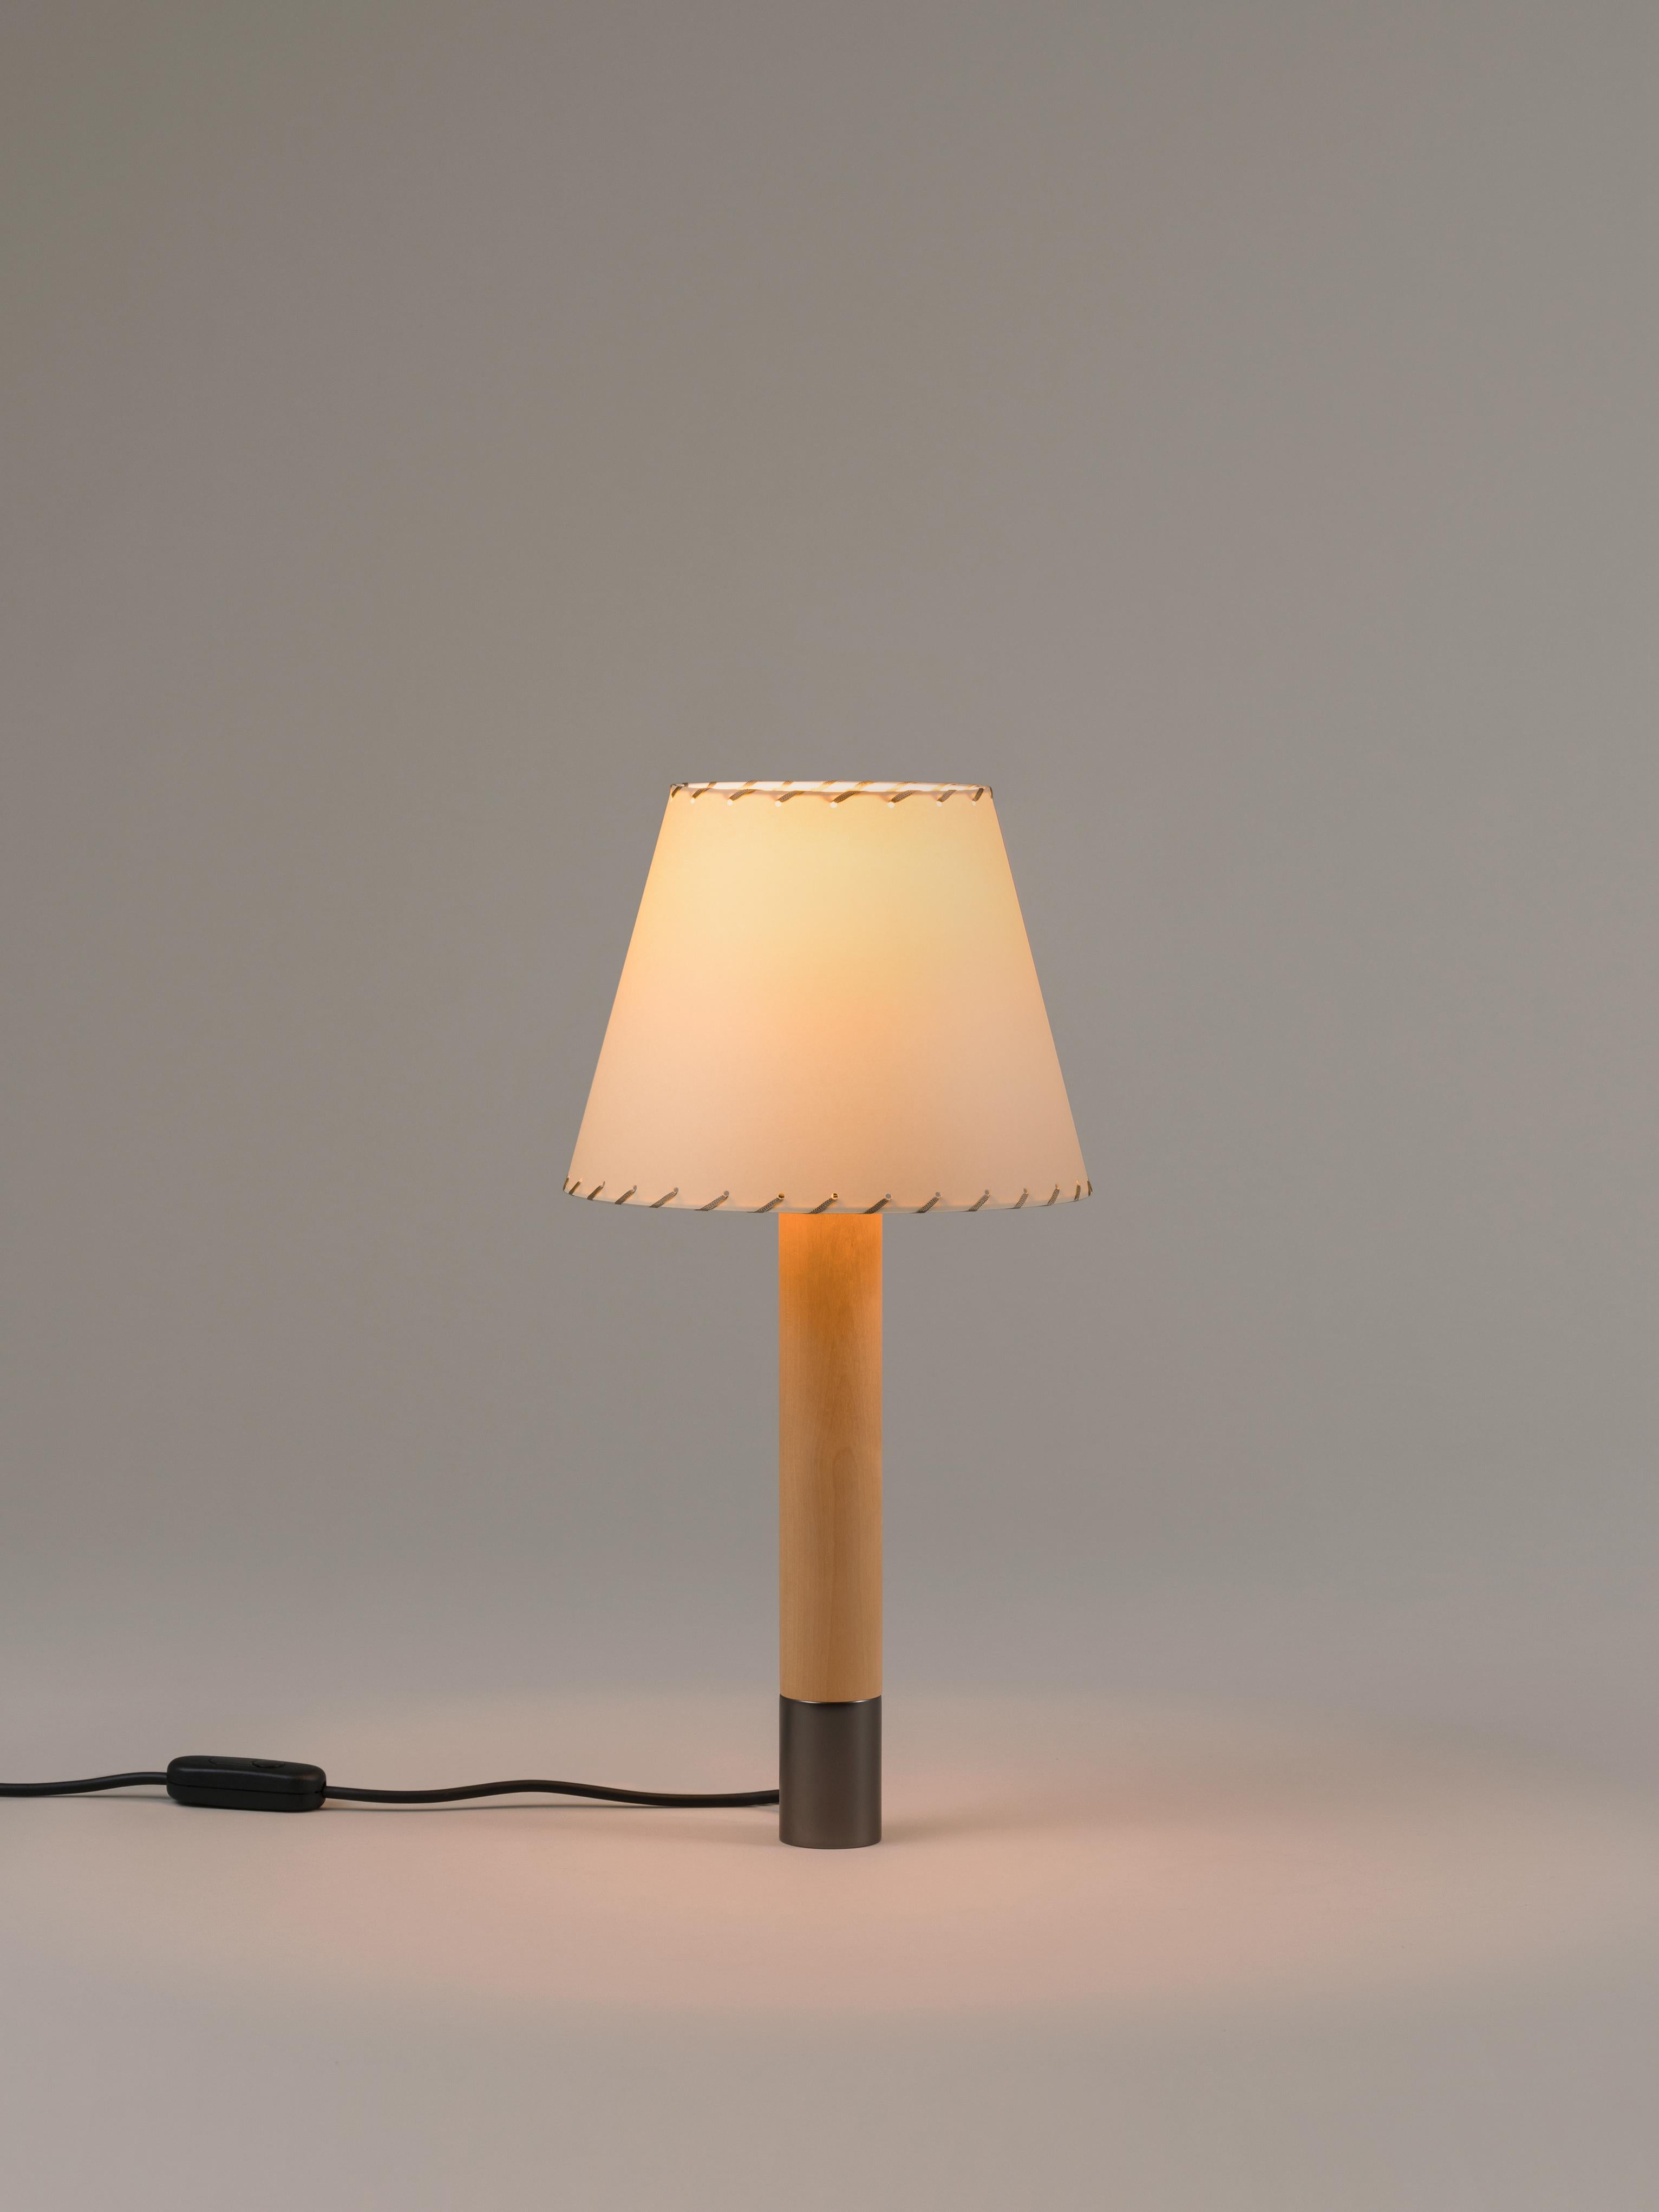 Bronze and beige bBásica M1 table lamp by Santiago Roqueta, Santa & Cole
Dimensions: D 25 x H 52 cm
Materials: Bronze, birch wood, paperboard.
Available in other shade colors and with or without the stabilizing disc.
Available in nickel or